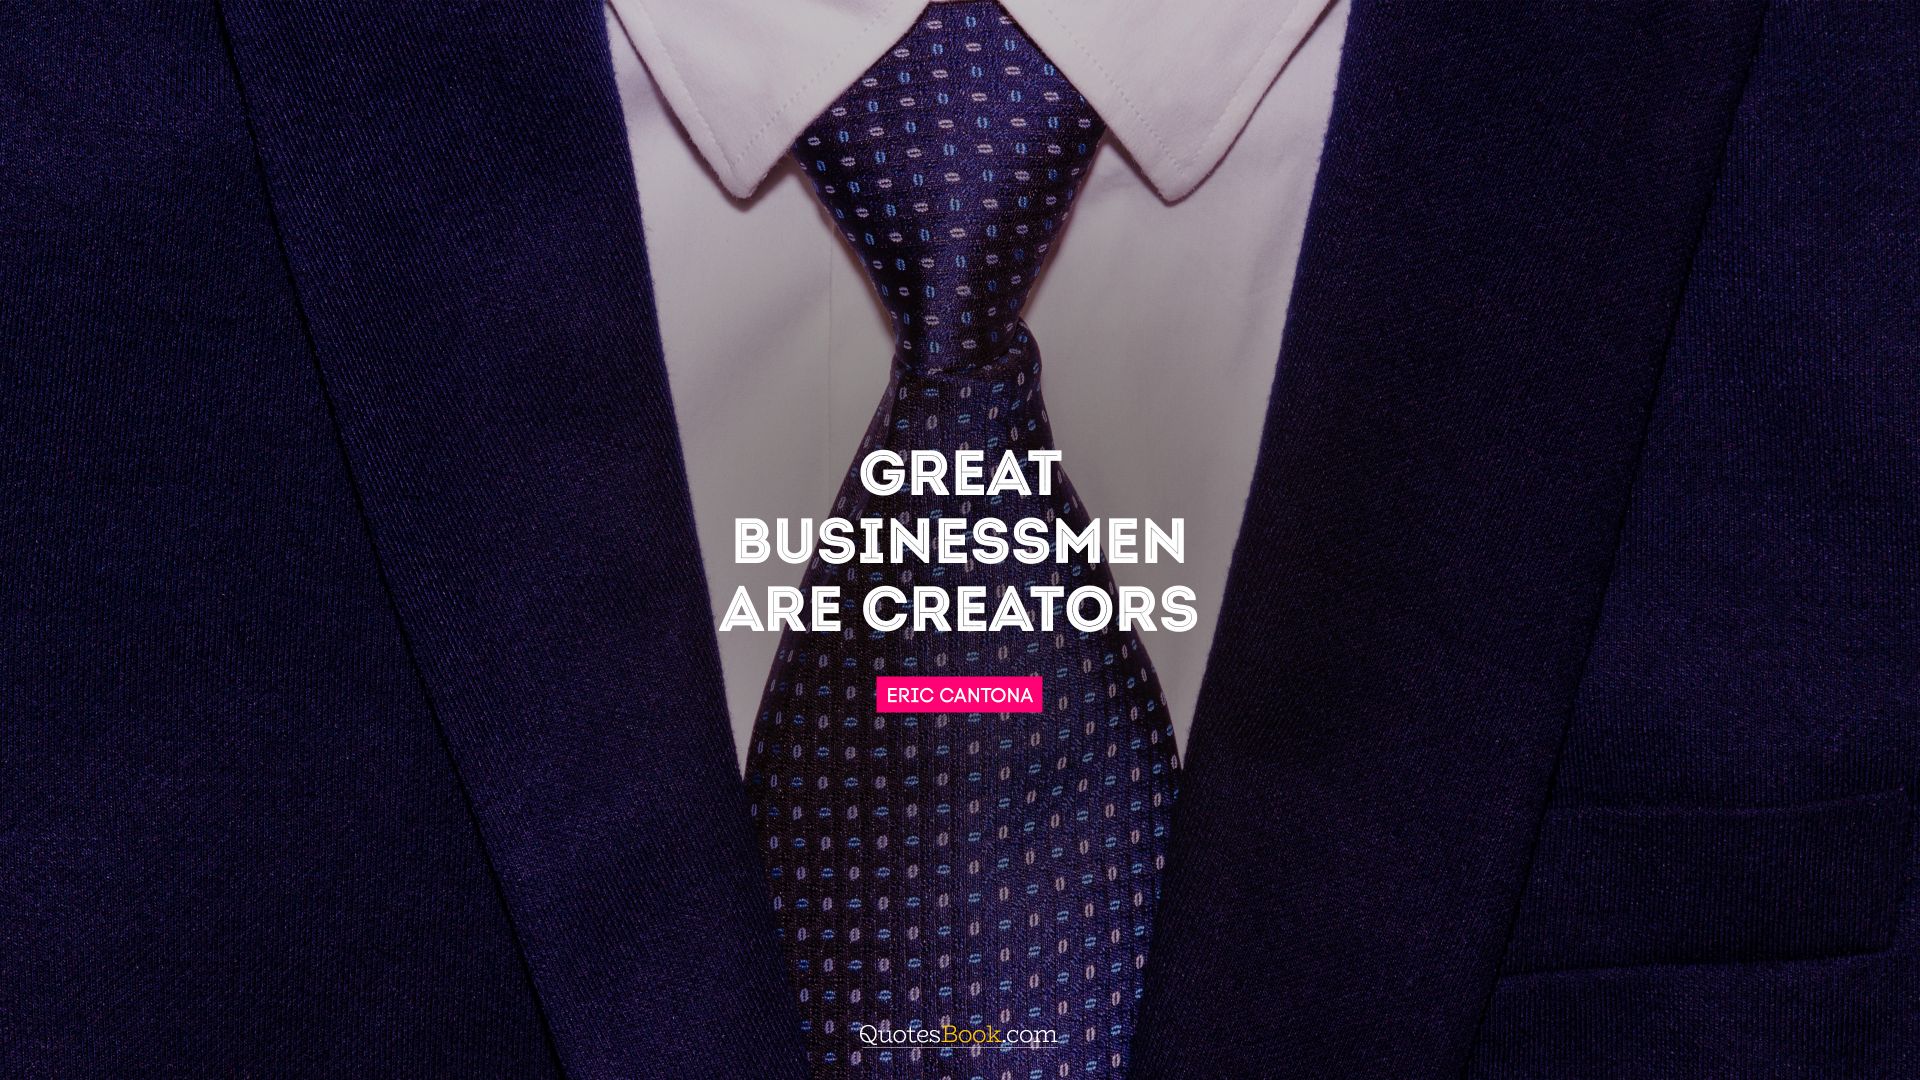 Great businessmen are creators. - Quote by Eric Cantona